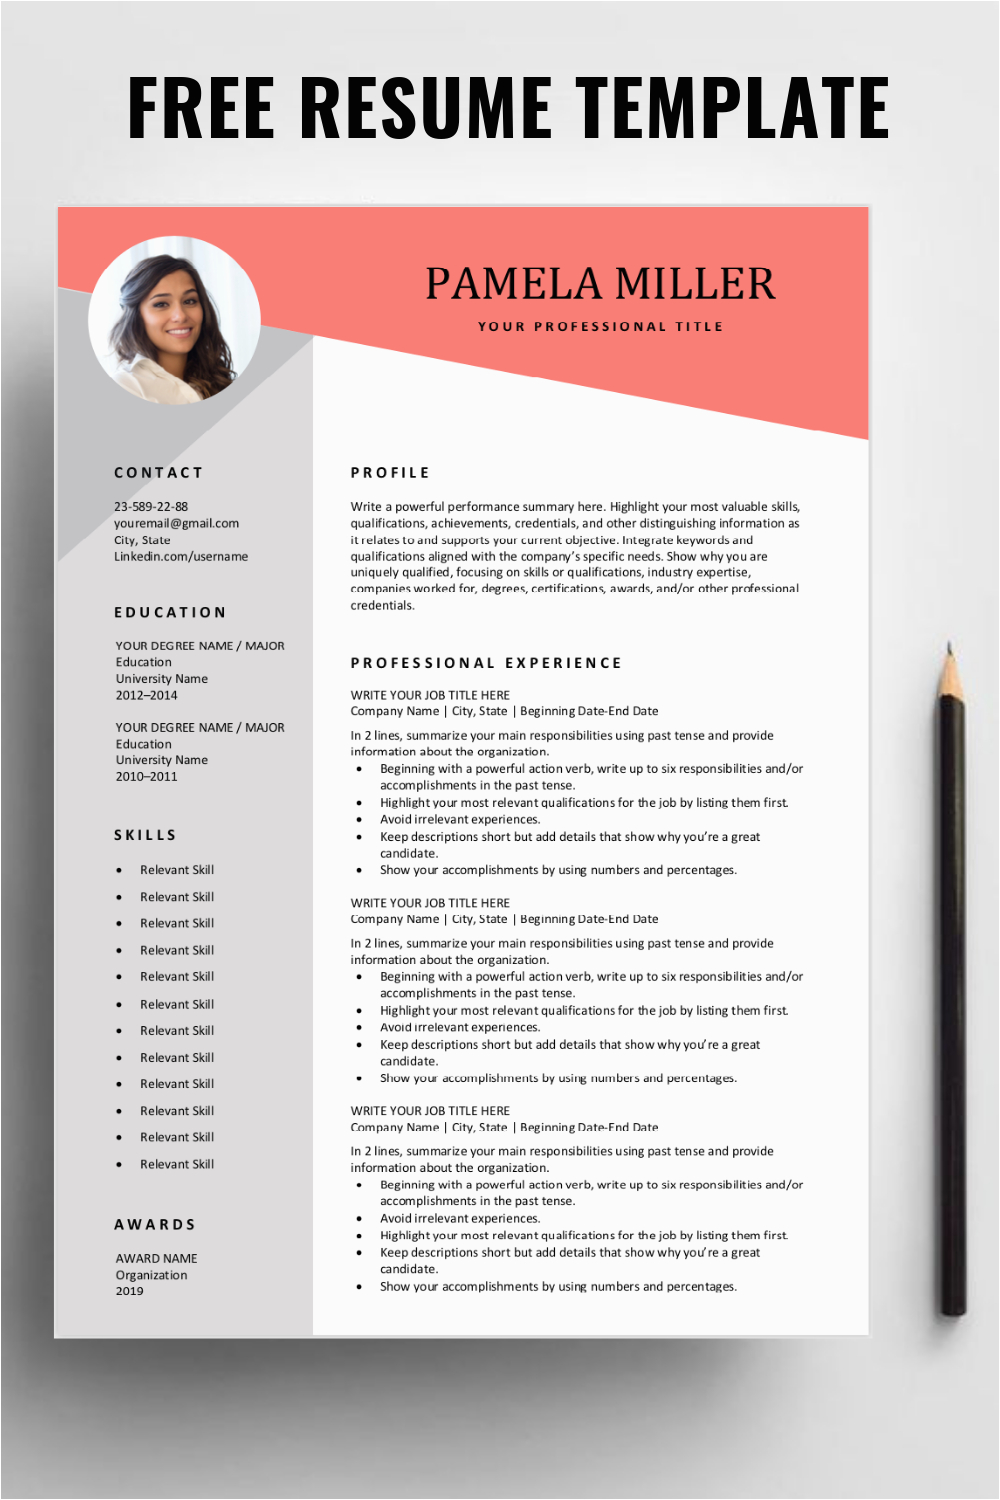 Resume with Picture Template Free Download Latest Resume Templates Free Download